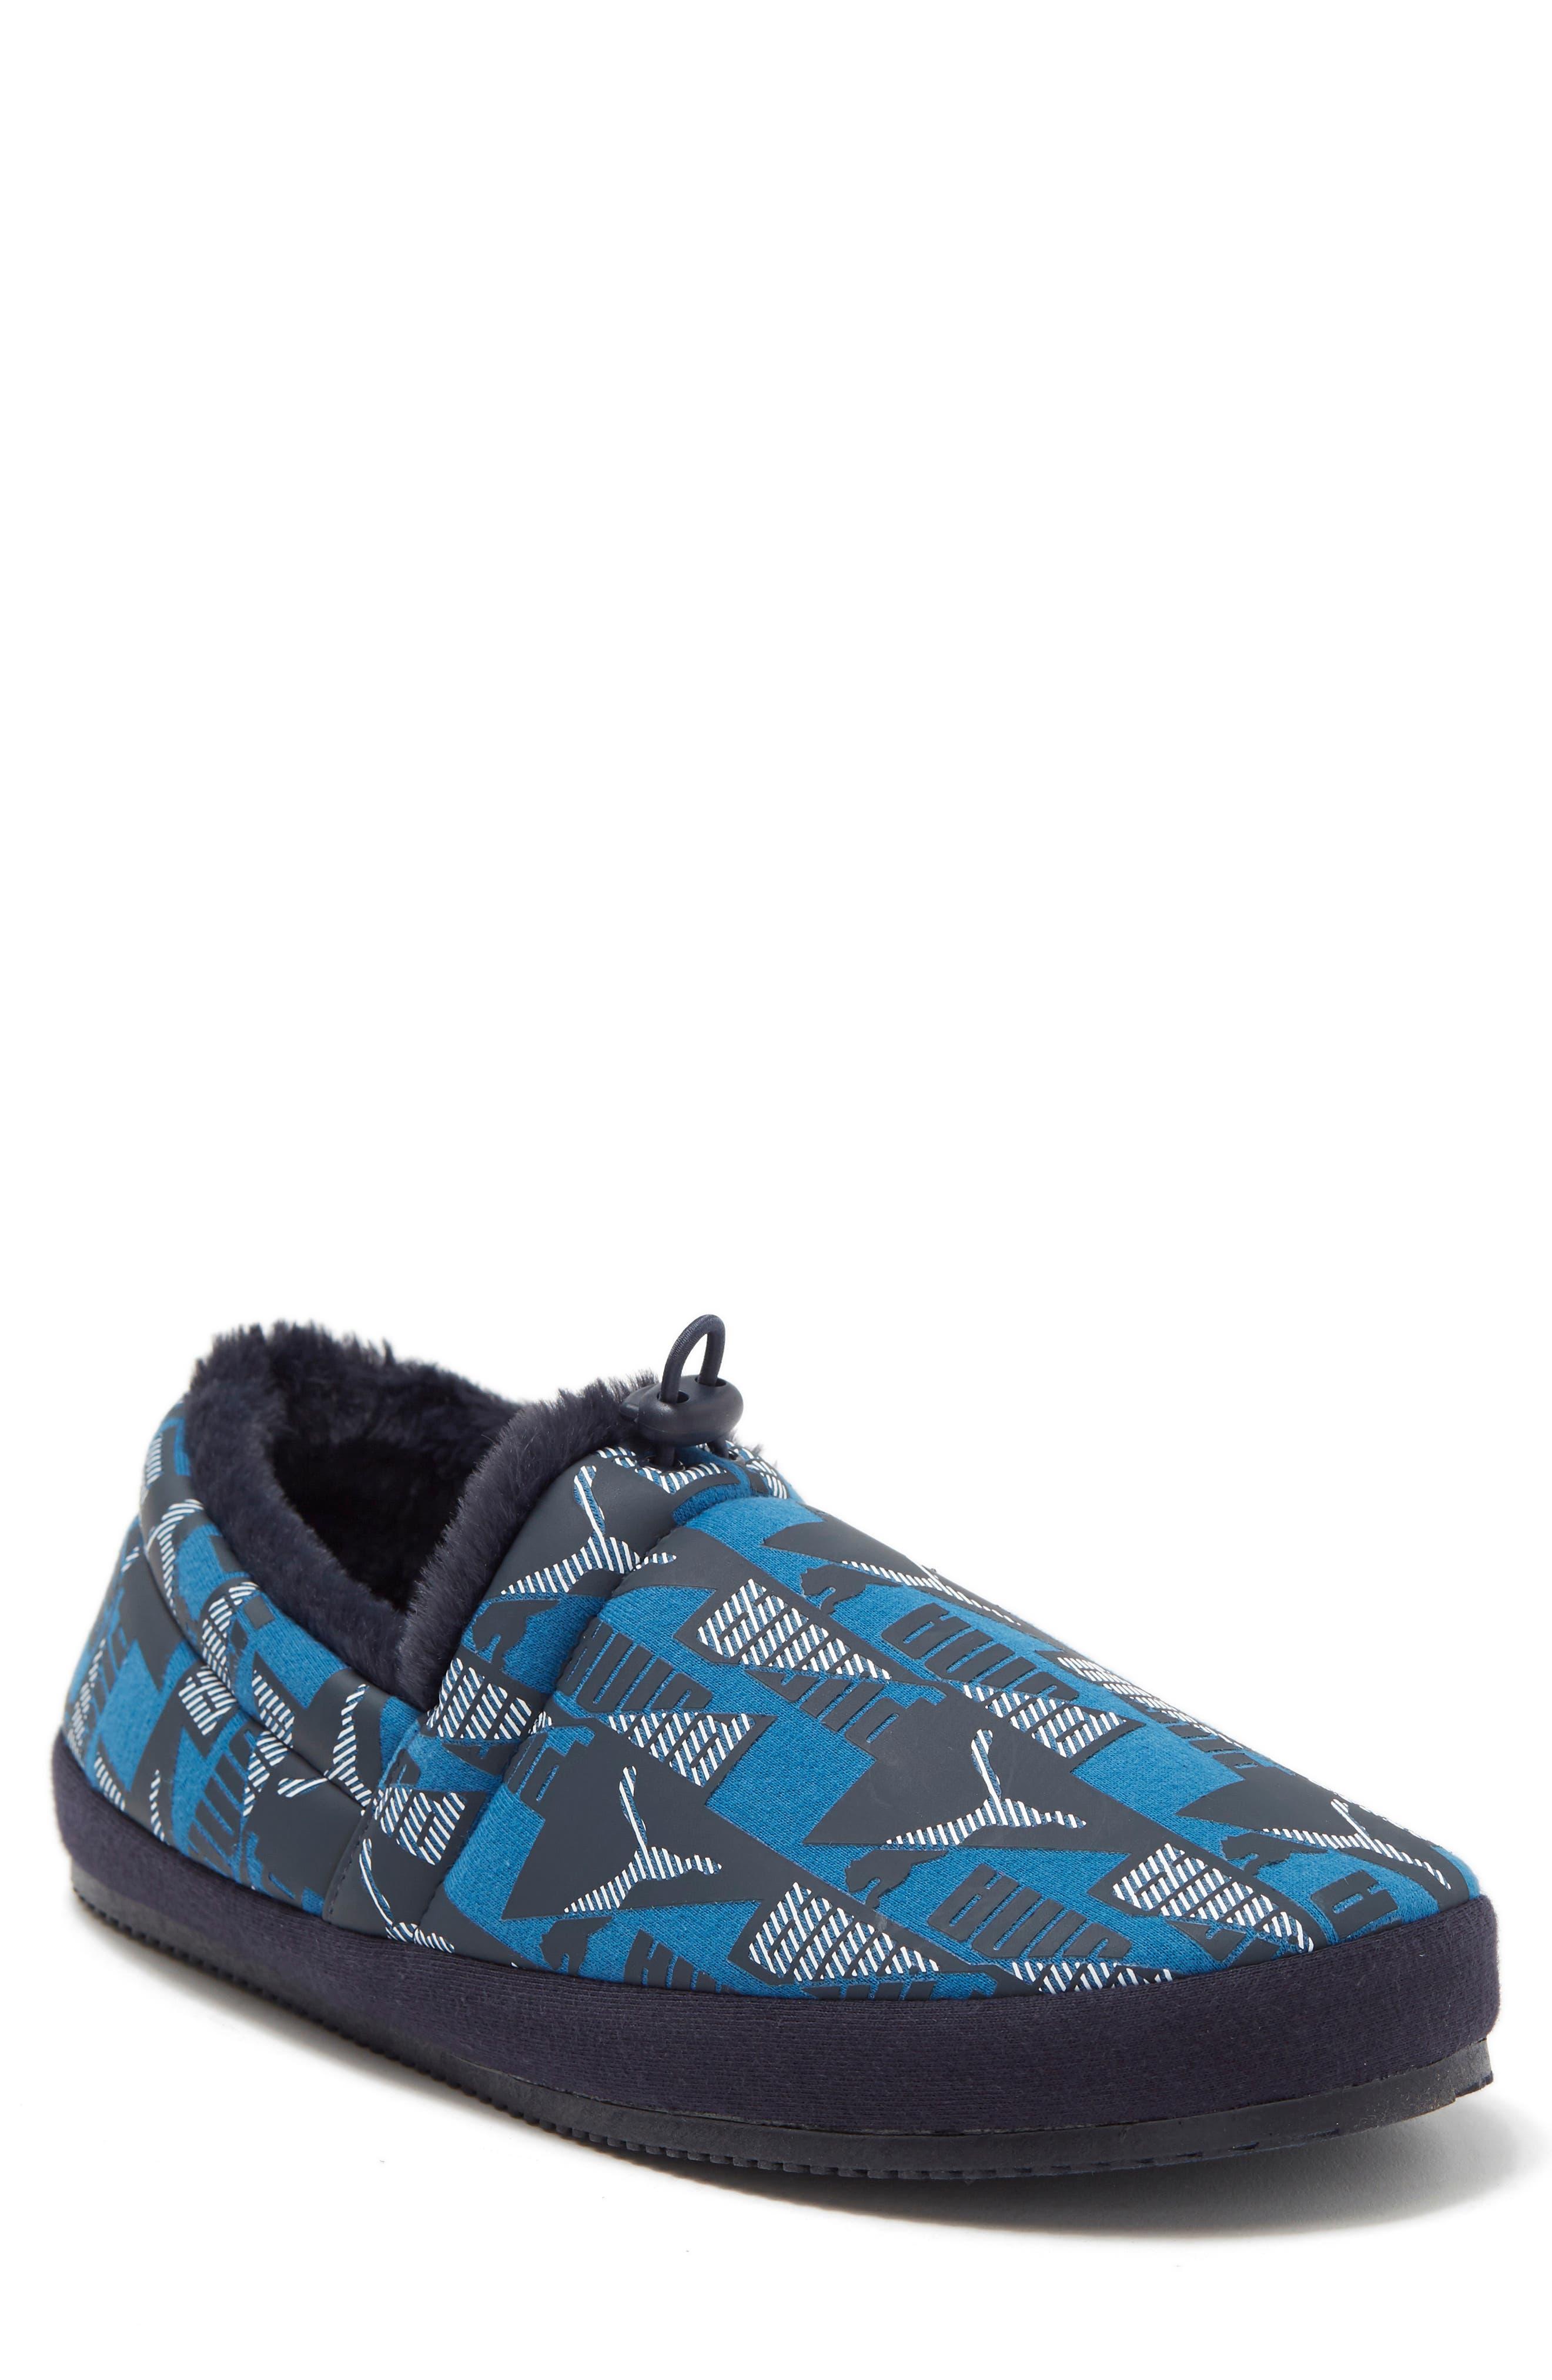 Puma Tuff Faux Fur Lined Mocc Jersey Slipper In Parisian Night Lake Blue At Nordstrom Rack For 